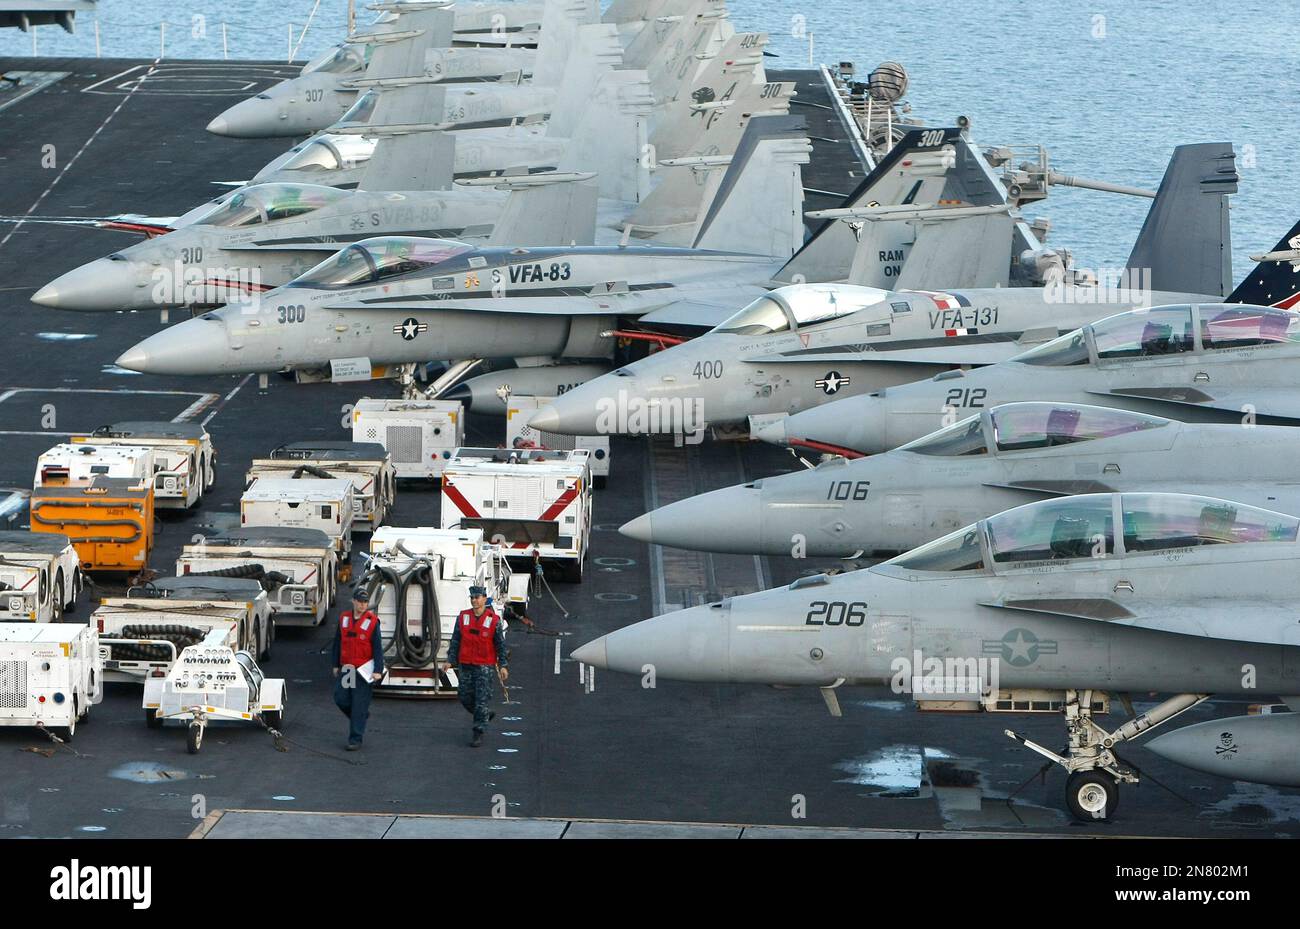 War planes are parked on the deck of the American nuclear-powered aircraft carrier USS Dwight D. Eisenhower, in Marseille harbor, southern France, Friday, March 8, 2013. US aircraft carrier USS Dwight D. Eisenhower departed from Norfolk, Virginia, USA on Feb 21 and stopped in Marseille, southern France, en route for the Mediterranean sea and Indian Ocean. (AP Photo/Claude Paris) Stock Photo